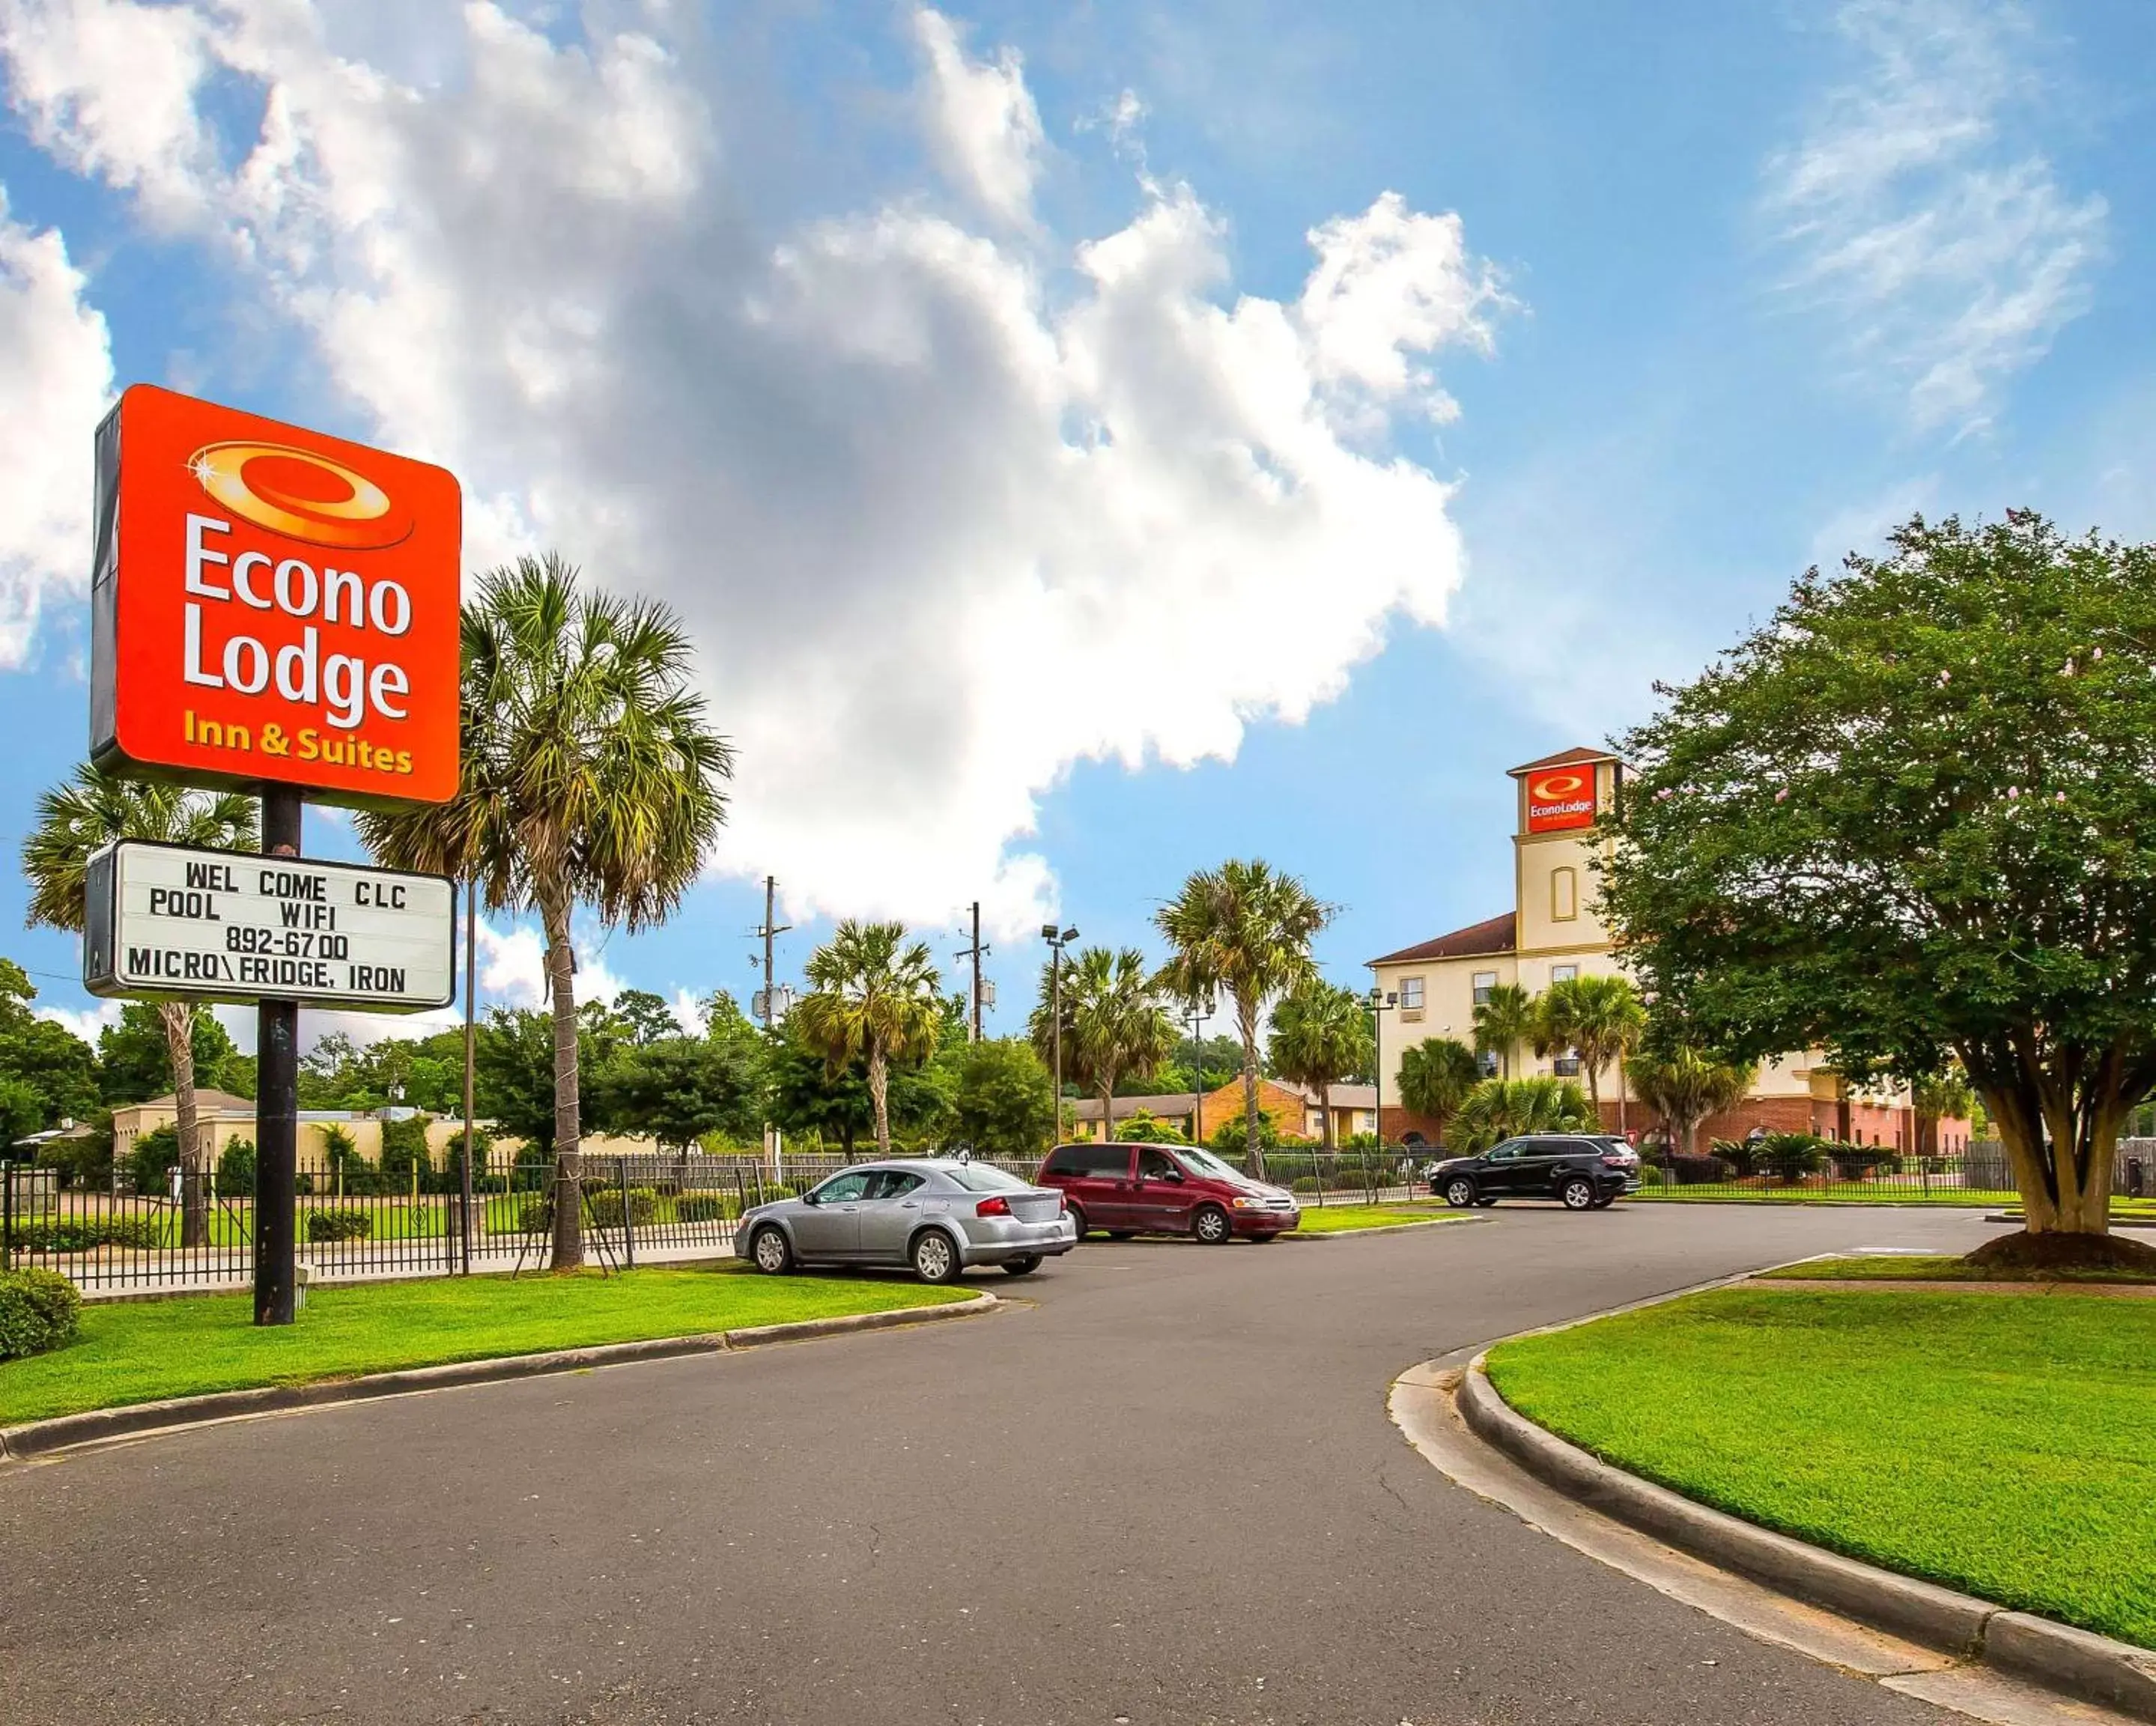 Property building in Econo Lodge Inn & Suites Beaumont